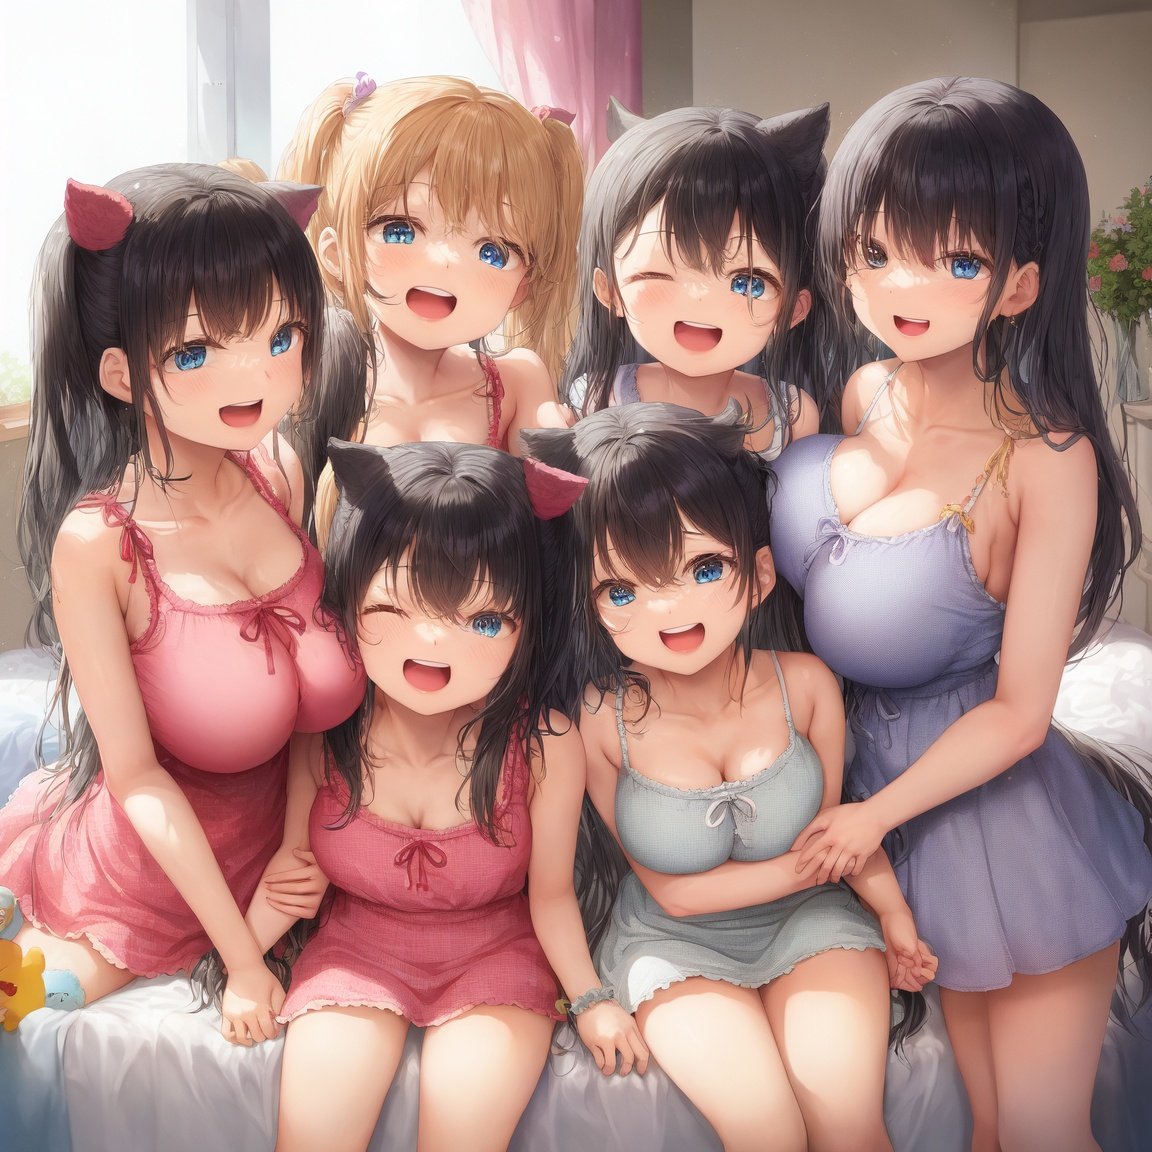 Image of 6+girls, (6+girls)+, Multiple identical women, many young girls with identical face and identical hairstyle and very long hair and very mive breast and long thigh and long legs and black hair and blue eyes and wearing sleeveless sundress are hugging each other and yelling at bedroom and happy, warm light, black hair, long hair, happy, bed beside table, in the morning, identical twin sister, (happy face)+